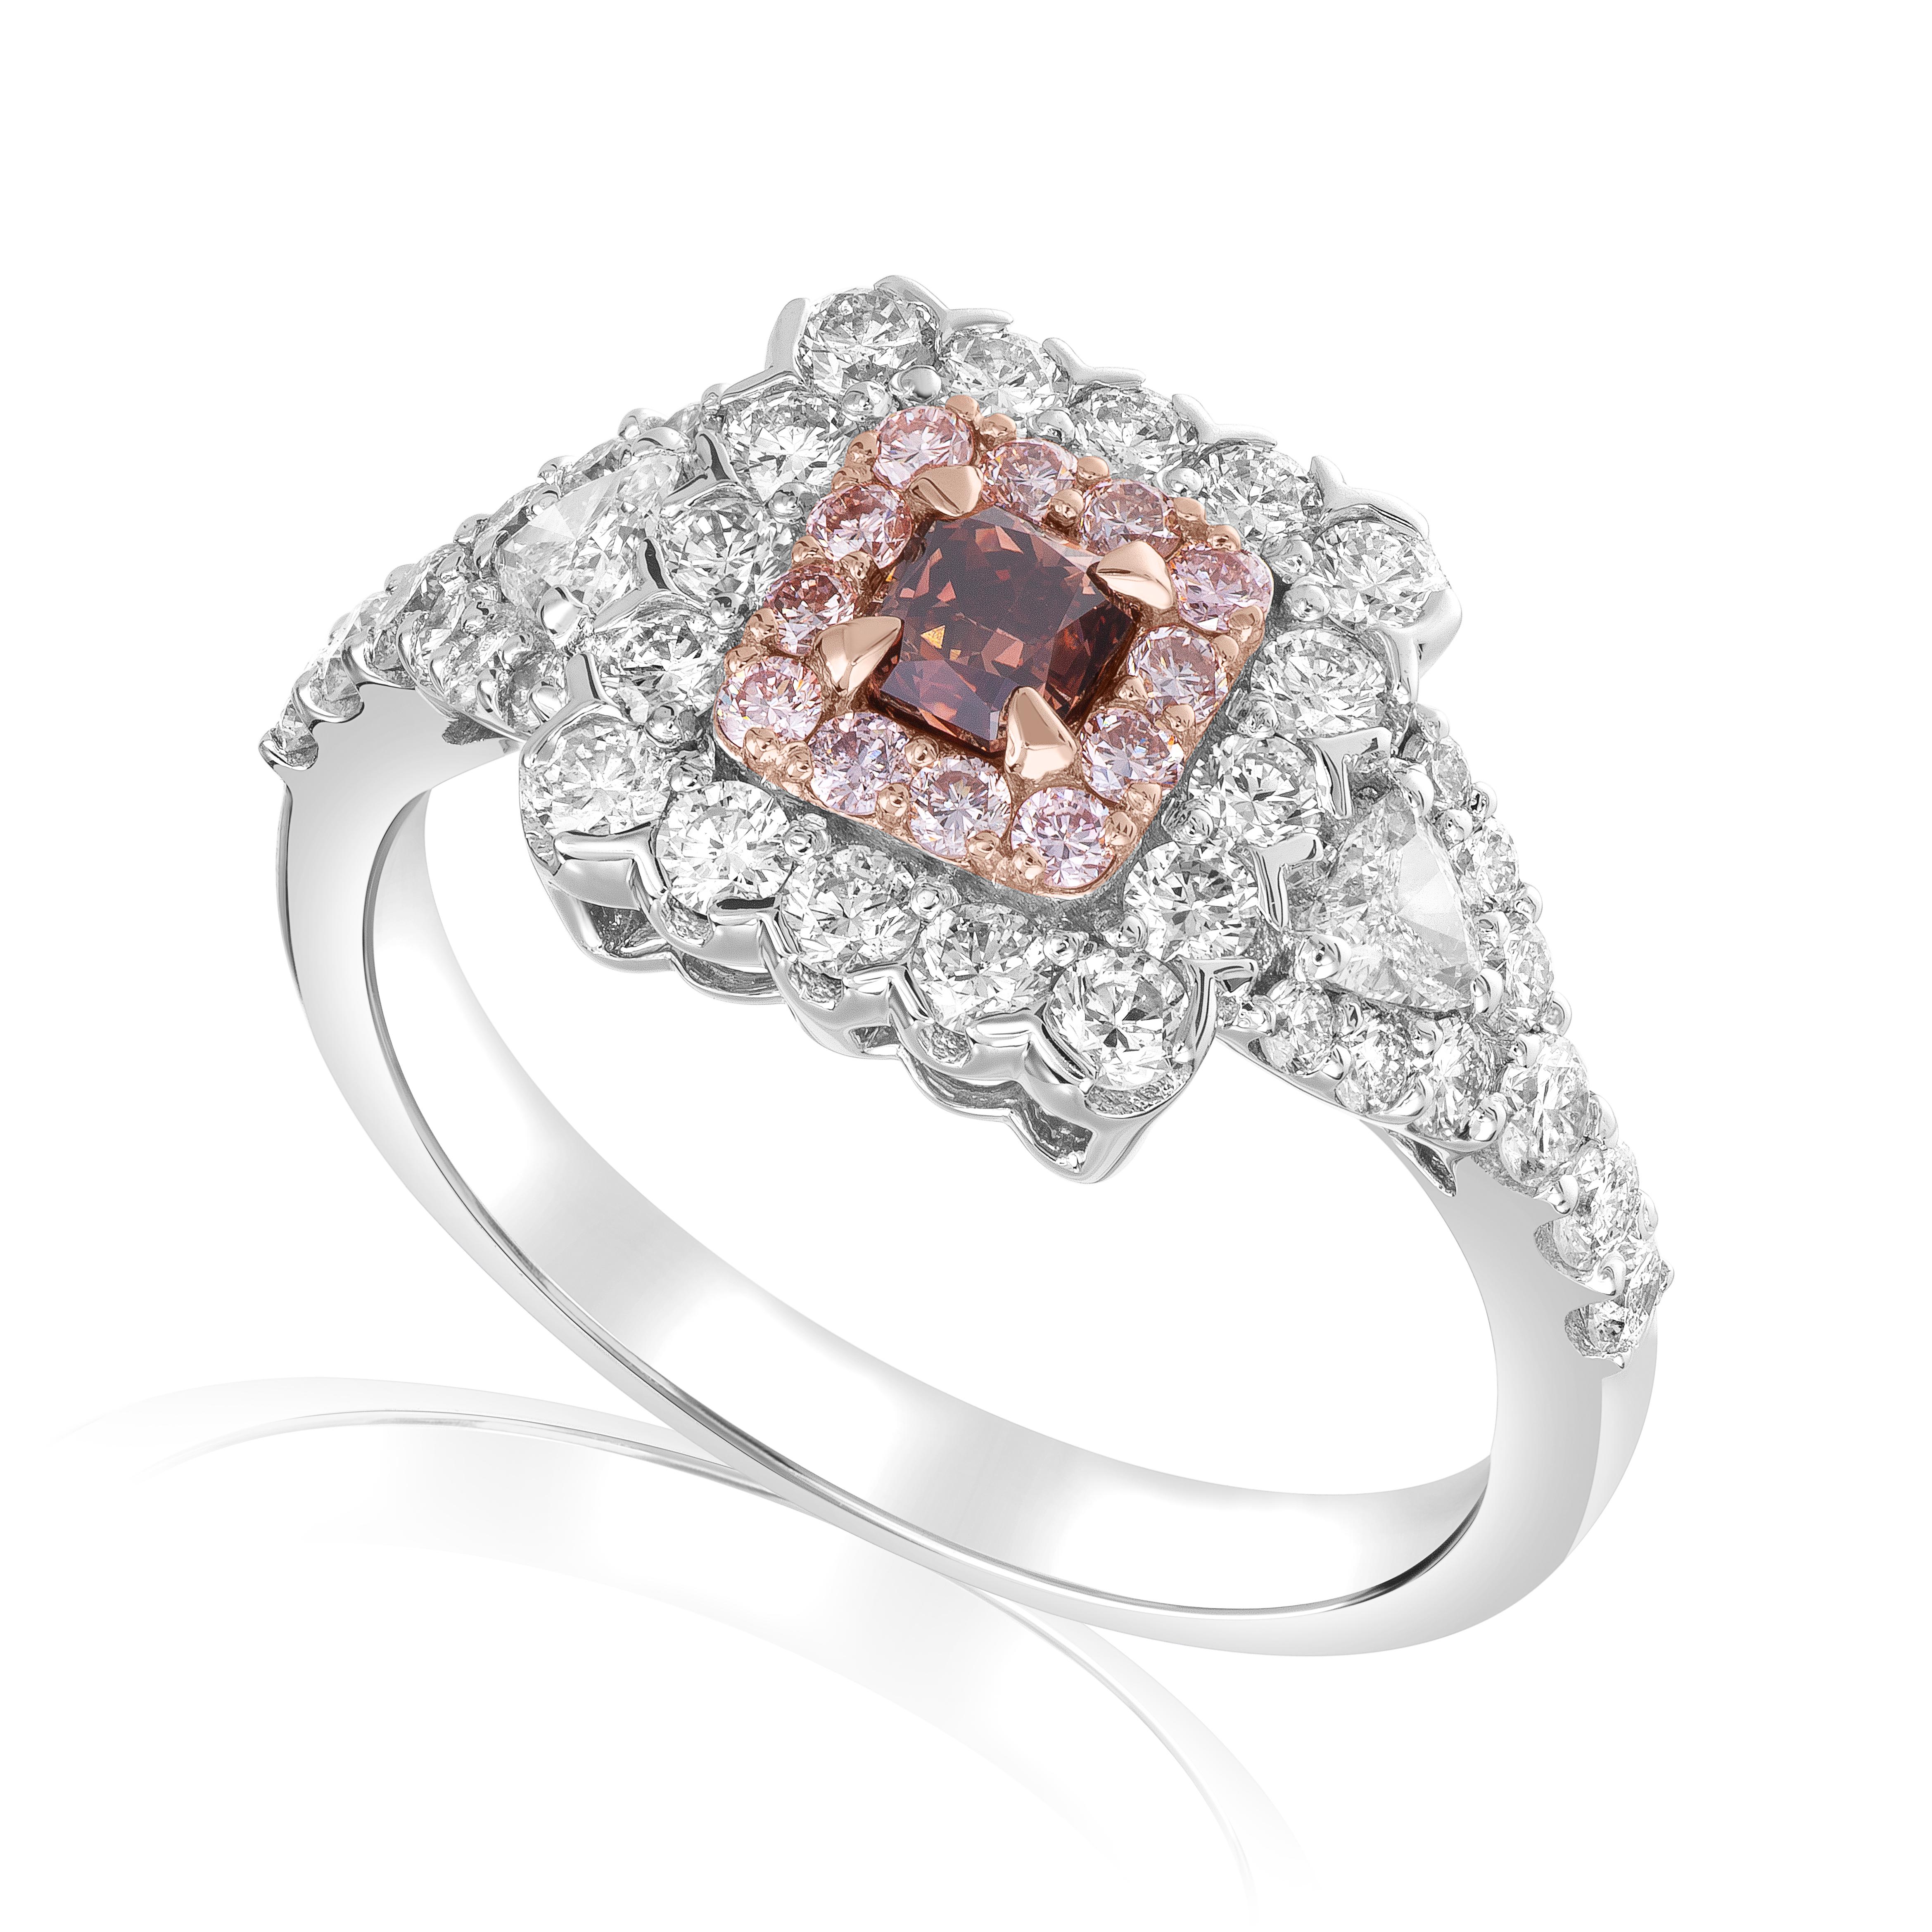 Celebrate your love with this extraordinary fancy-color engagement ring that is as unique as your relationship. The centerpiece of this captivating ring is a stunning 0.23-carat fancy orangy brown radiant diamond with VS2 clarity, creating a warm